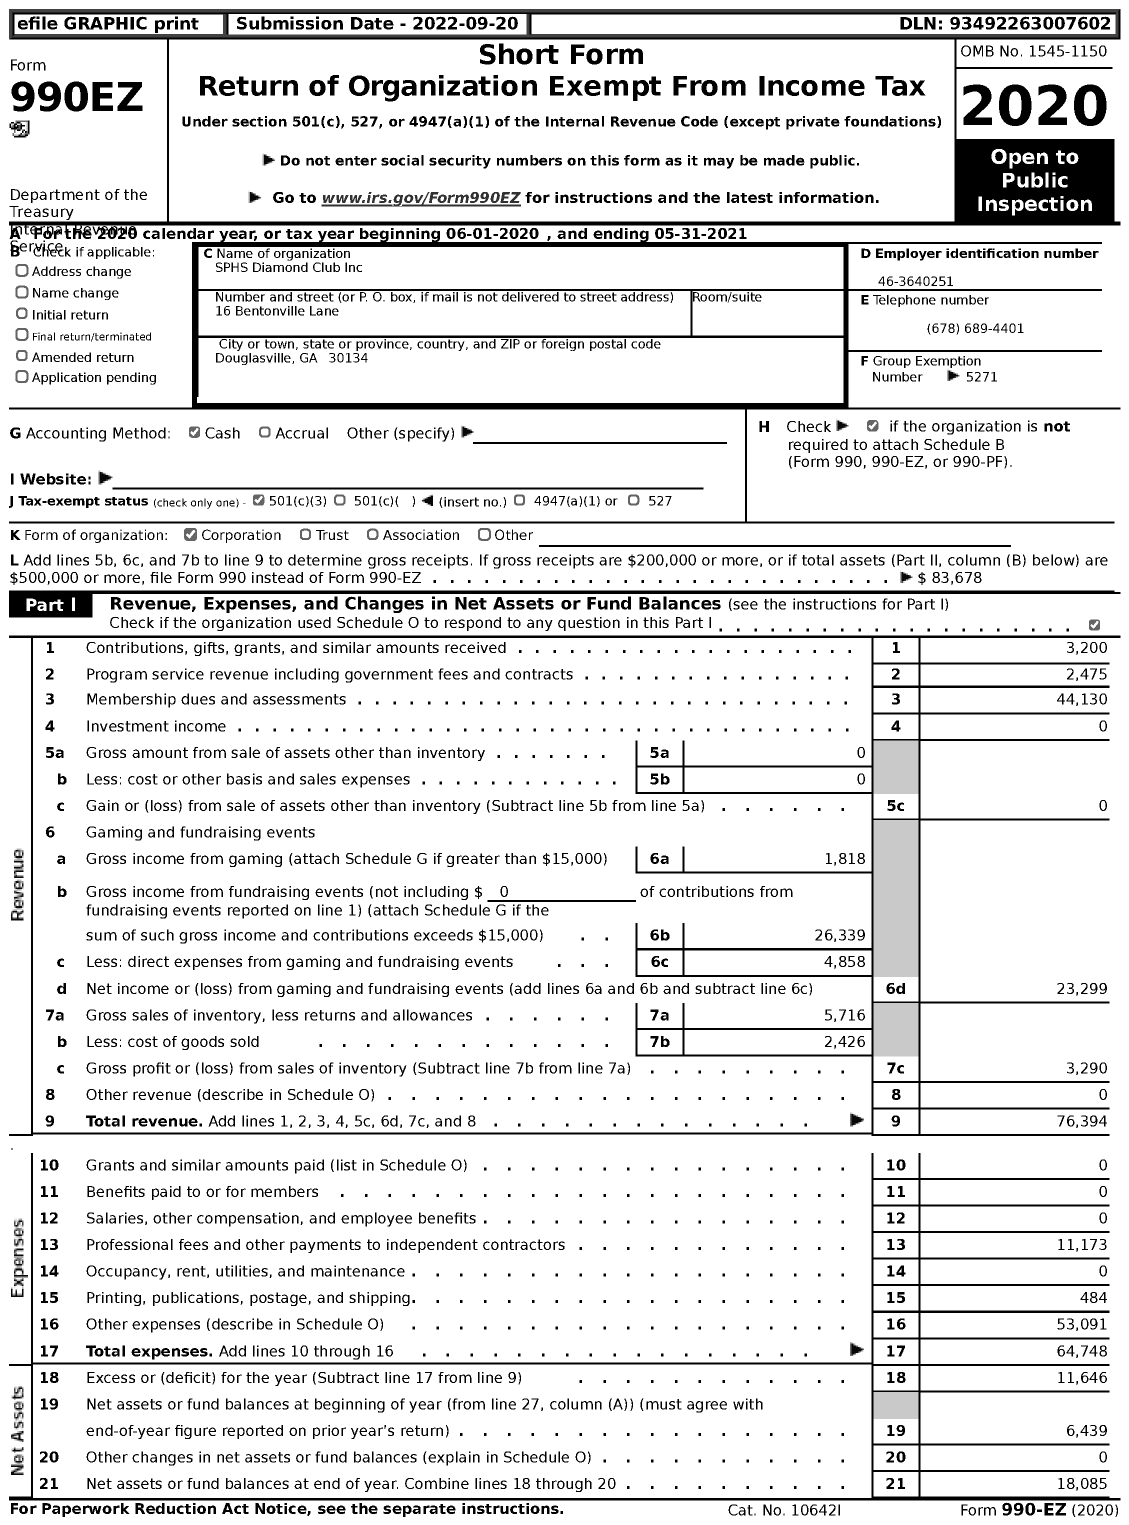 Image of first page of 2020 Form 990EZ for SPHS Diamond Club